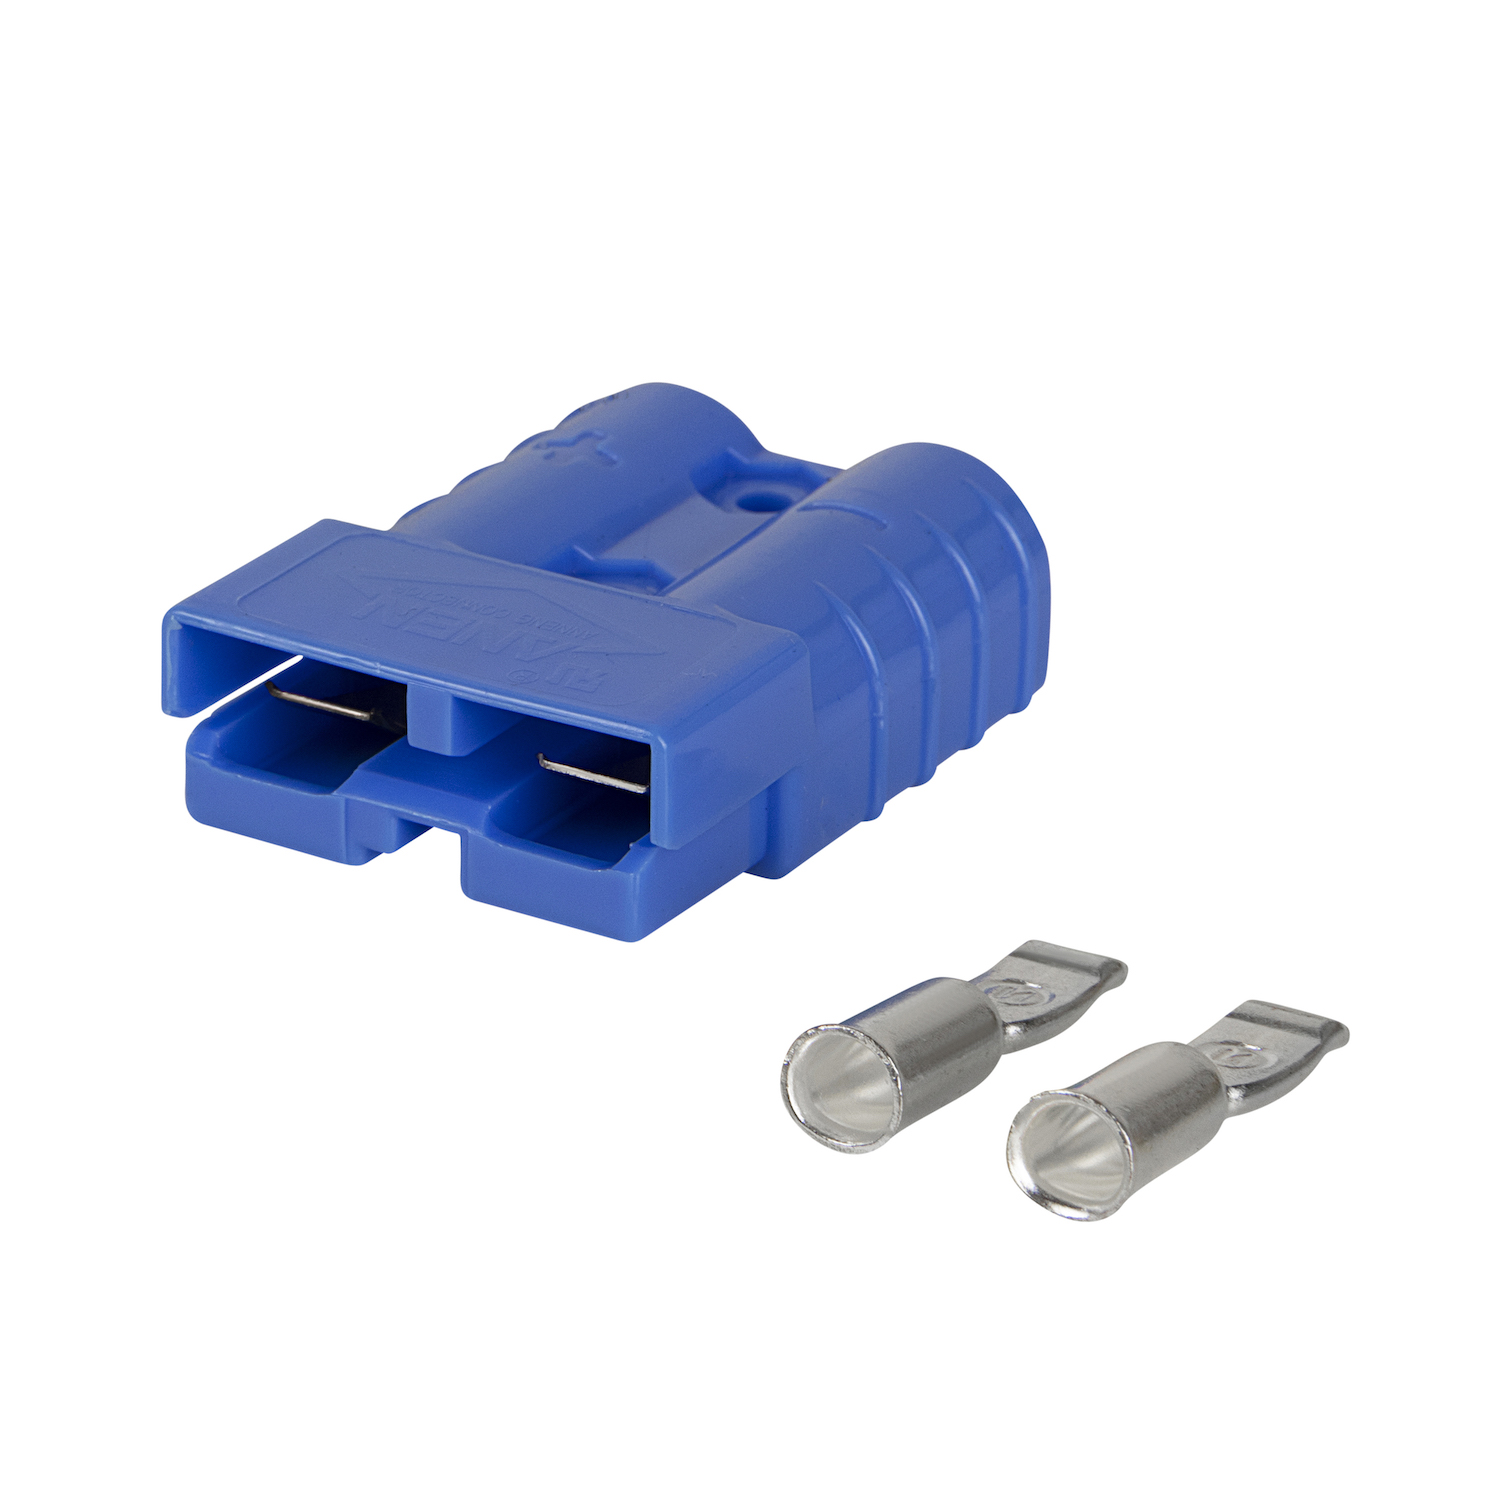 Rebelcell ANEN connector blue product image